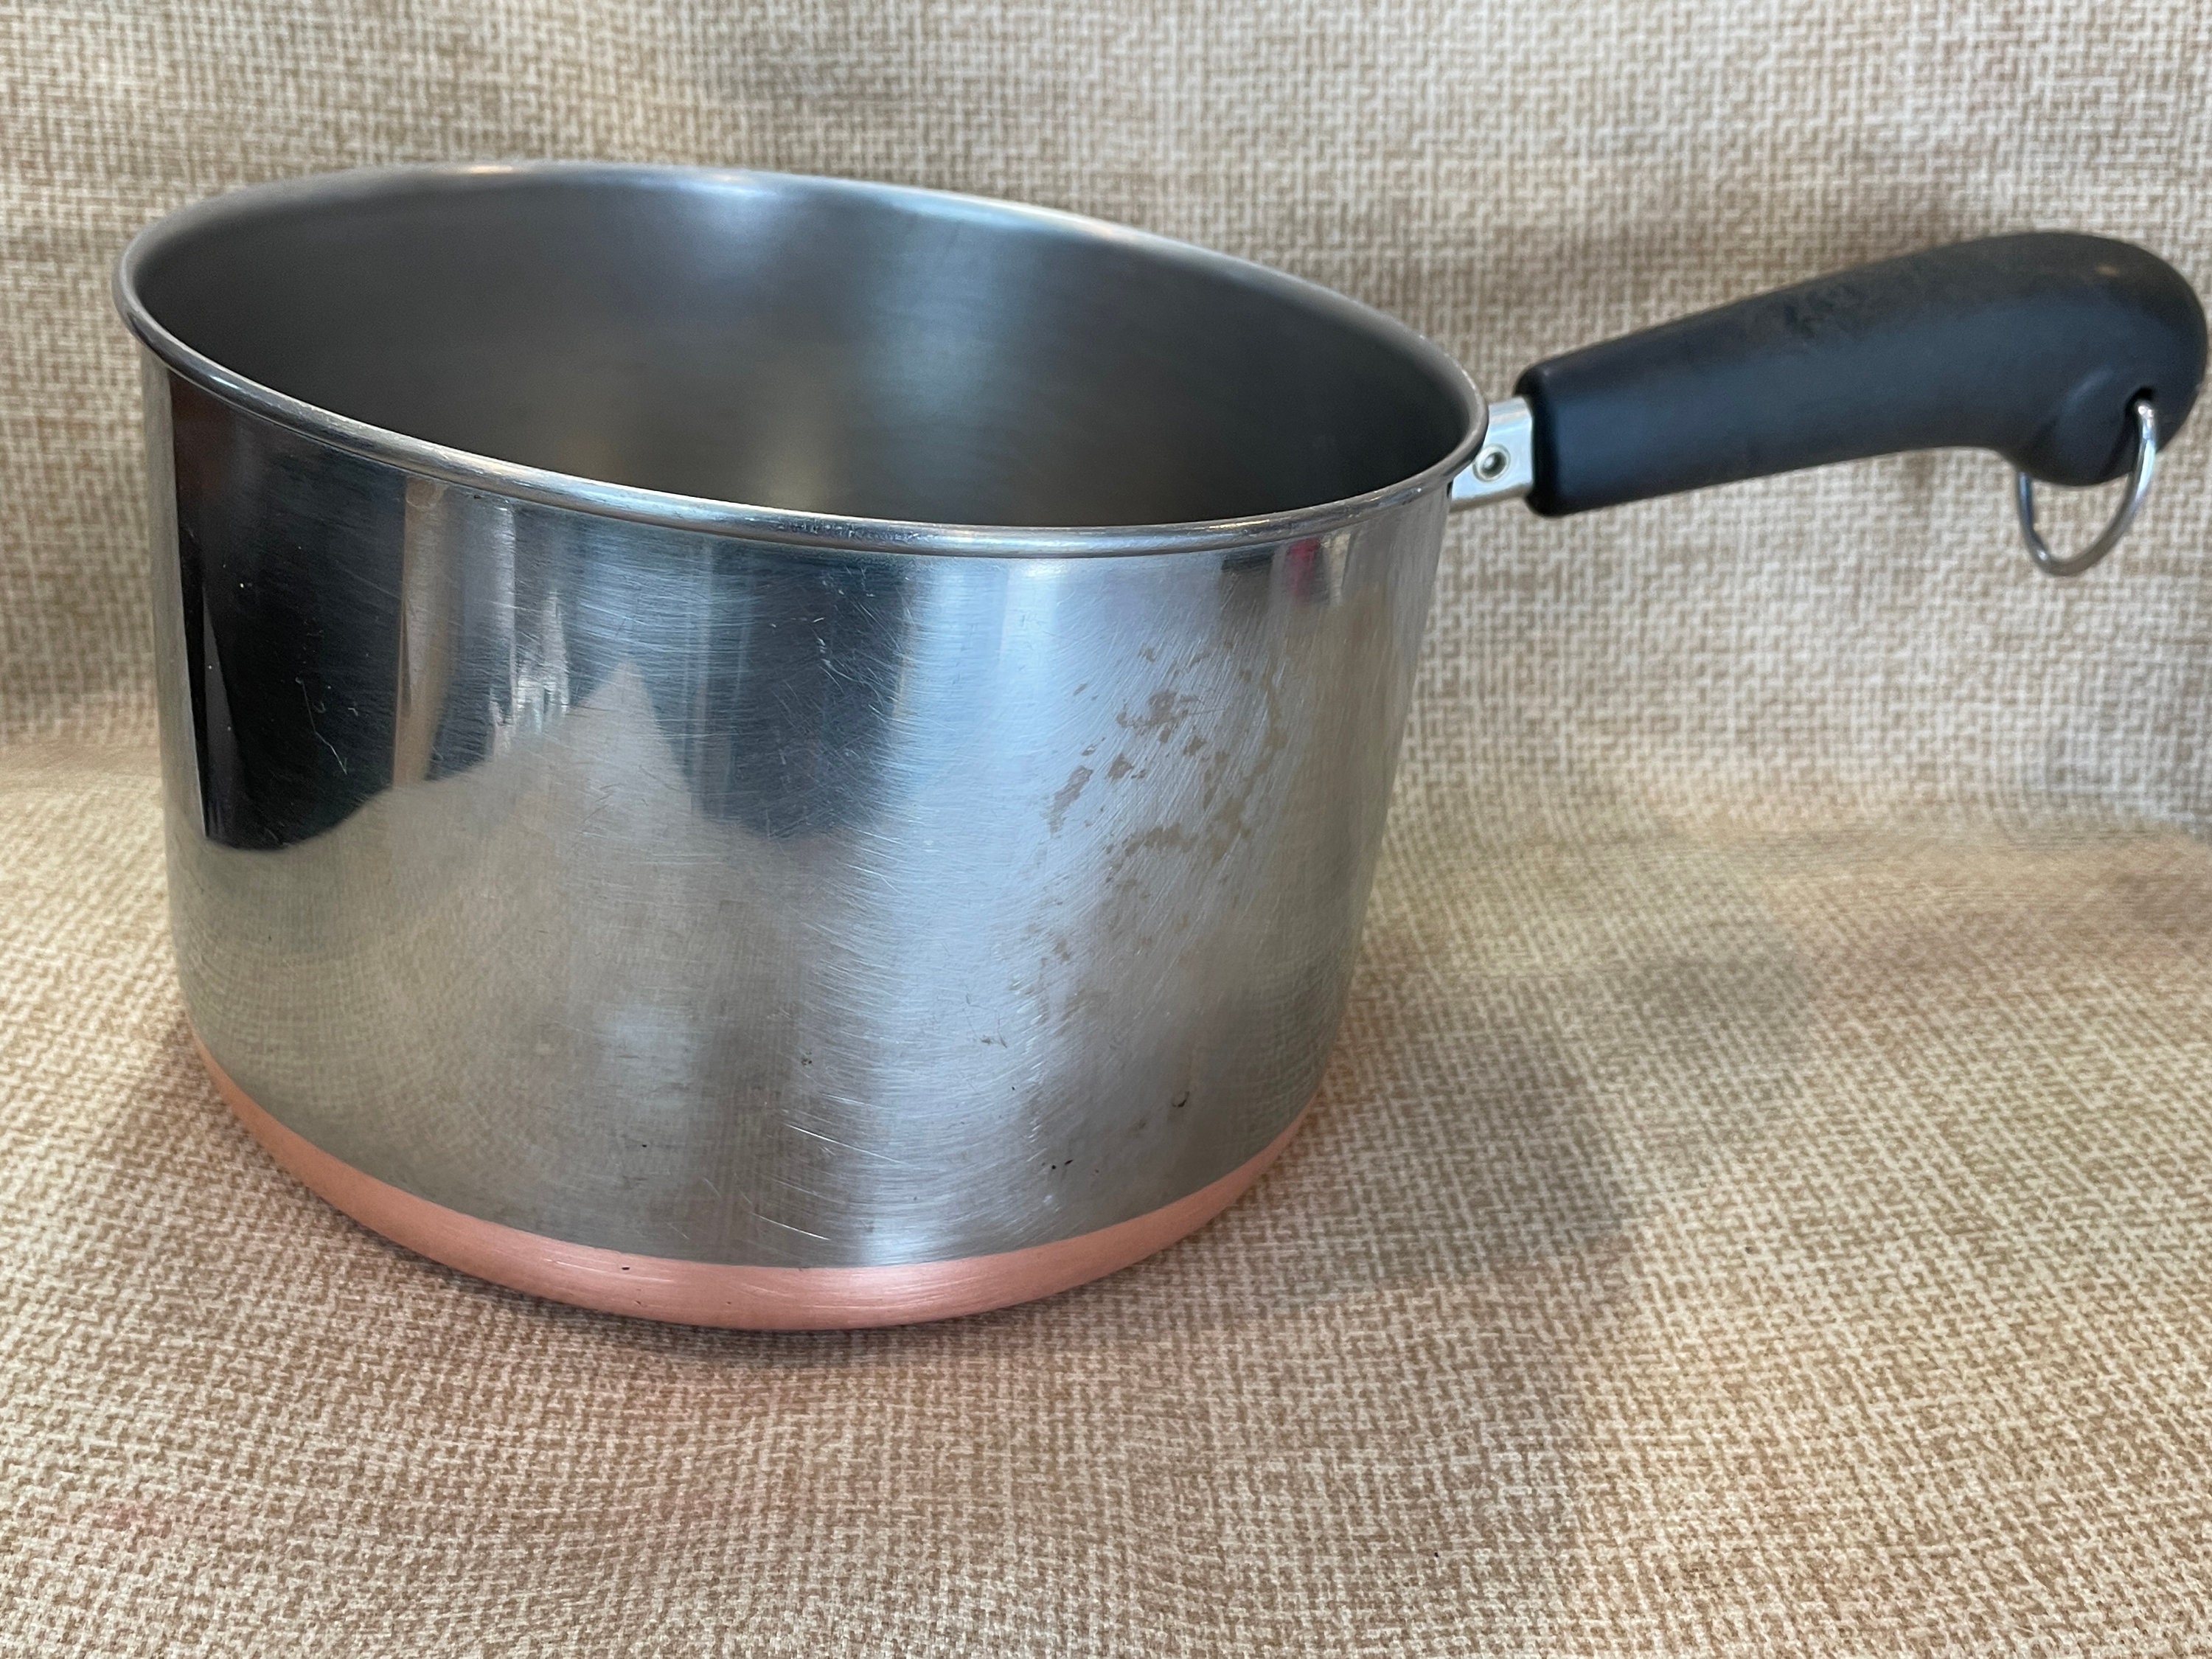  Revere Ware Stainless Steel 3 Qt. Saucepan with Lid